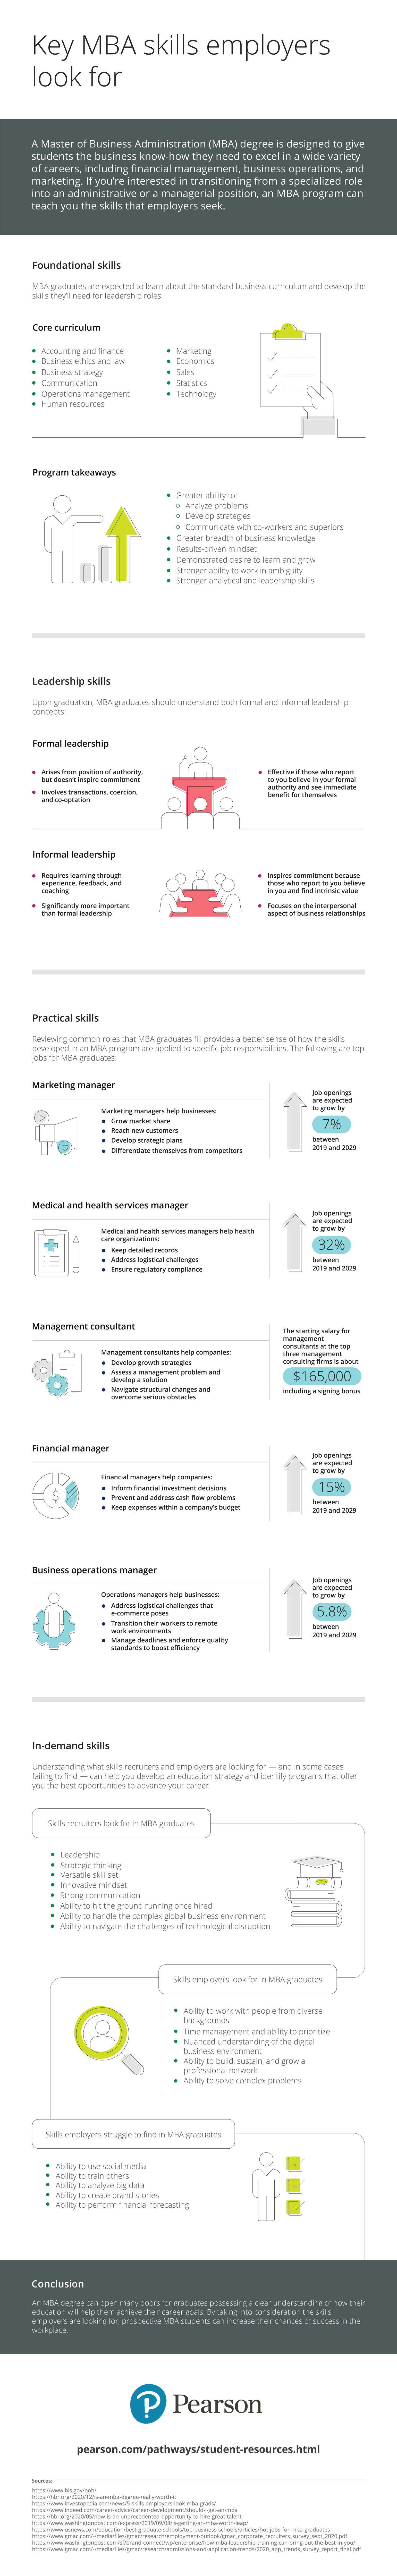 Infographic that lists key MBA skills that employers look for when assessing job candidates.